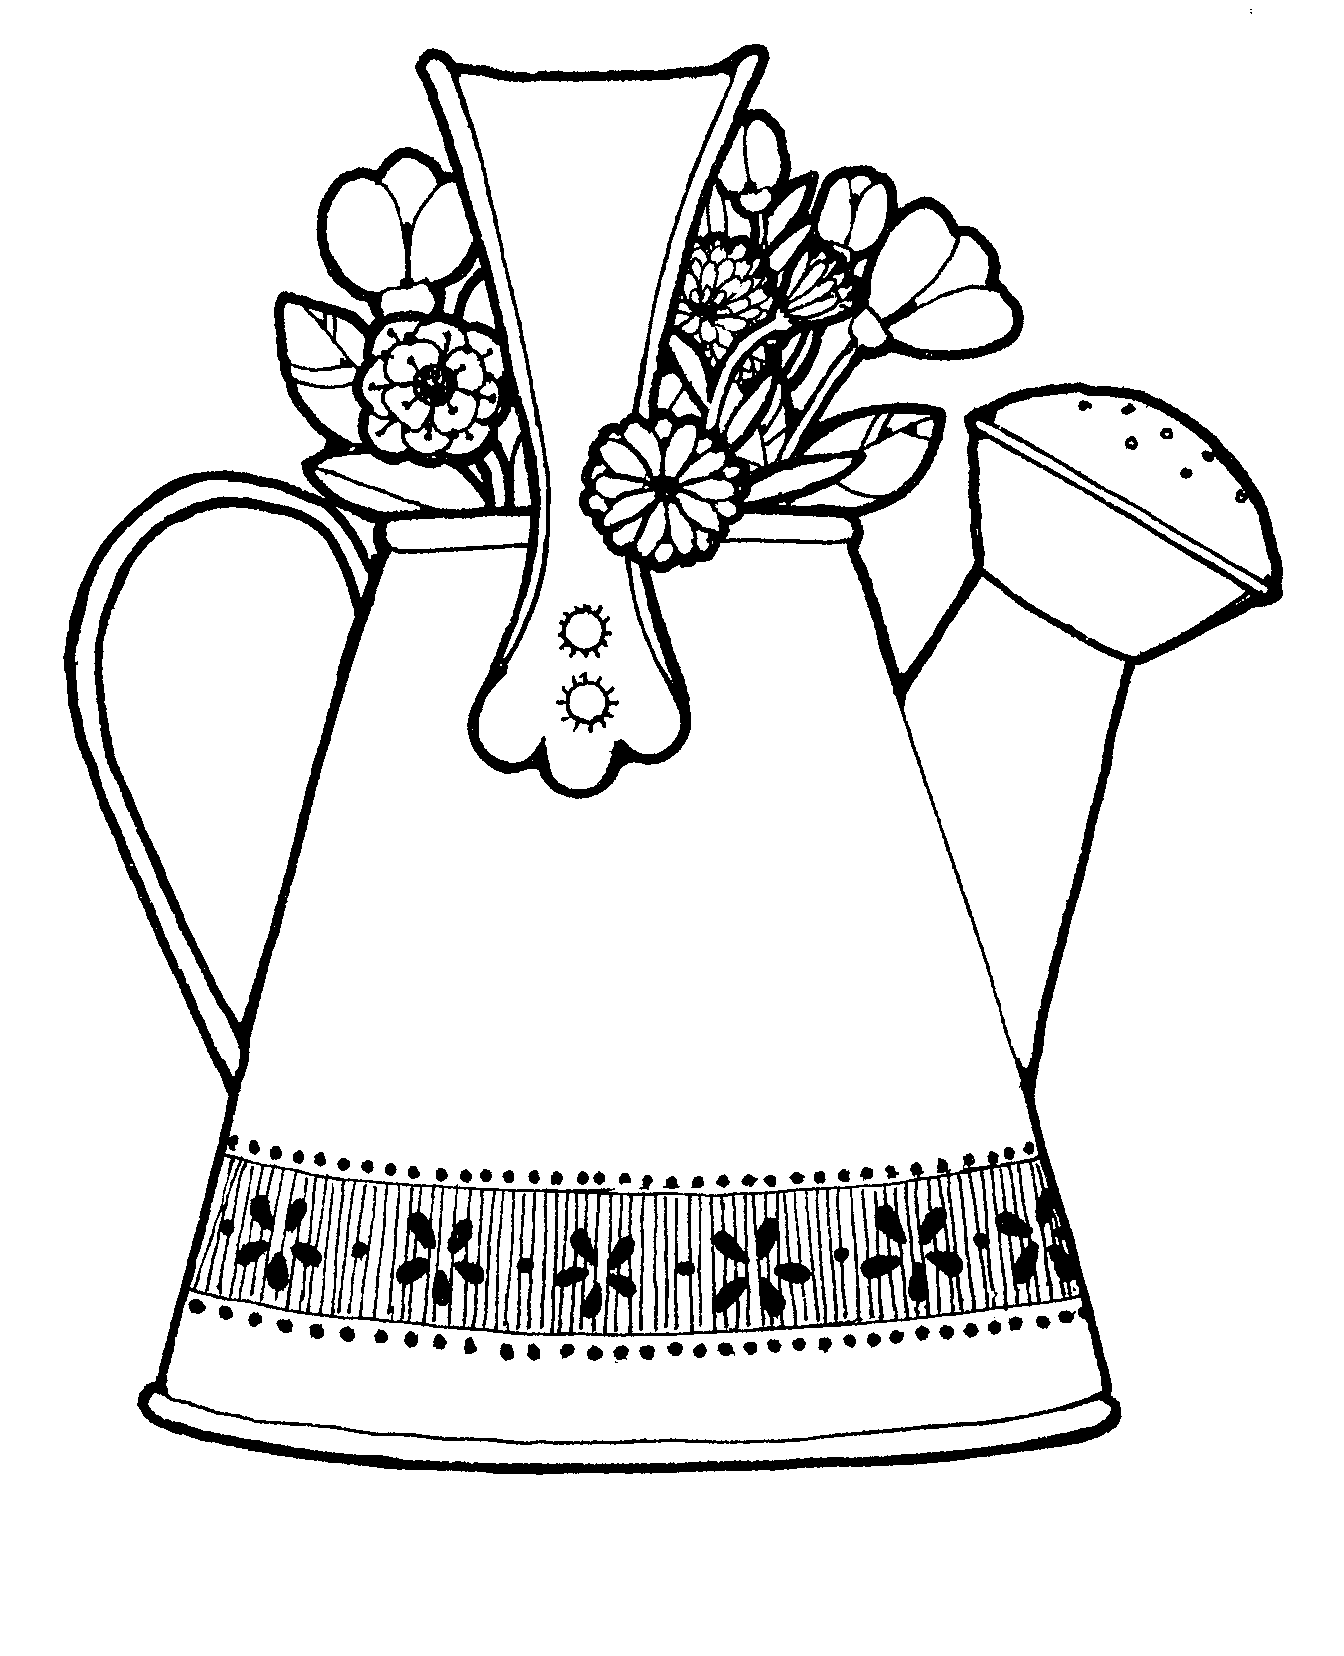 Watering Can 2 | Mormon Share